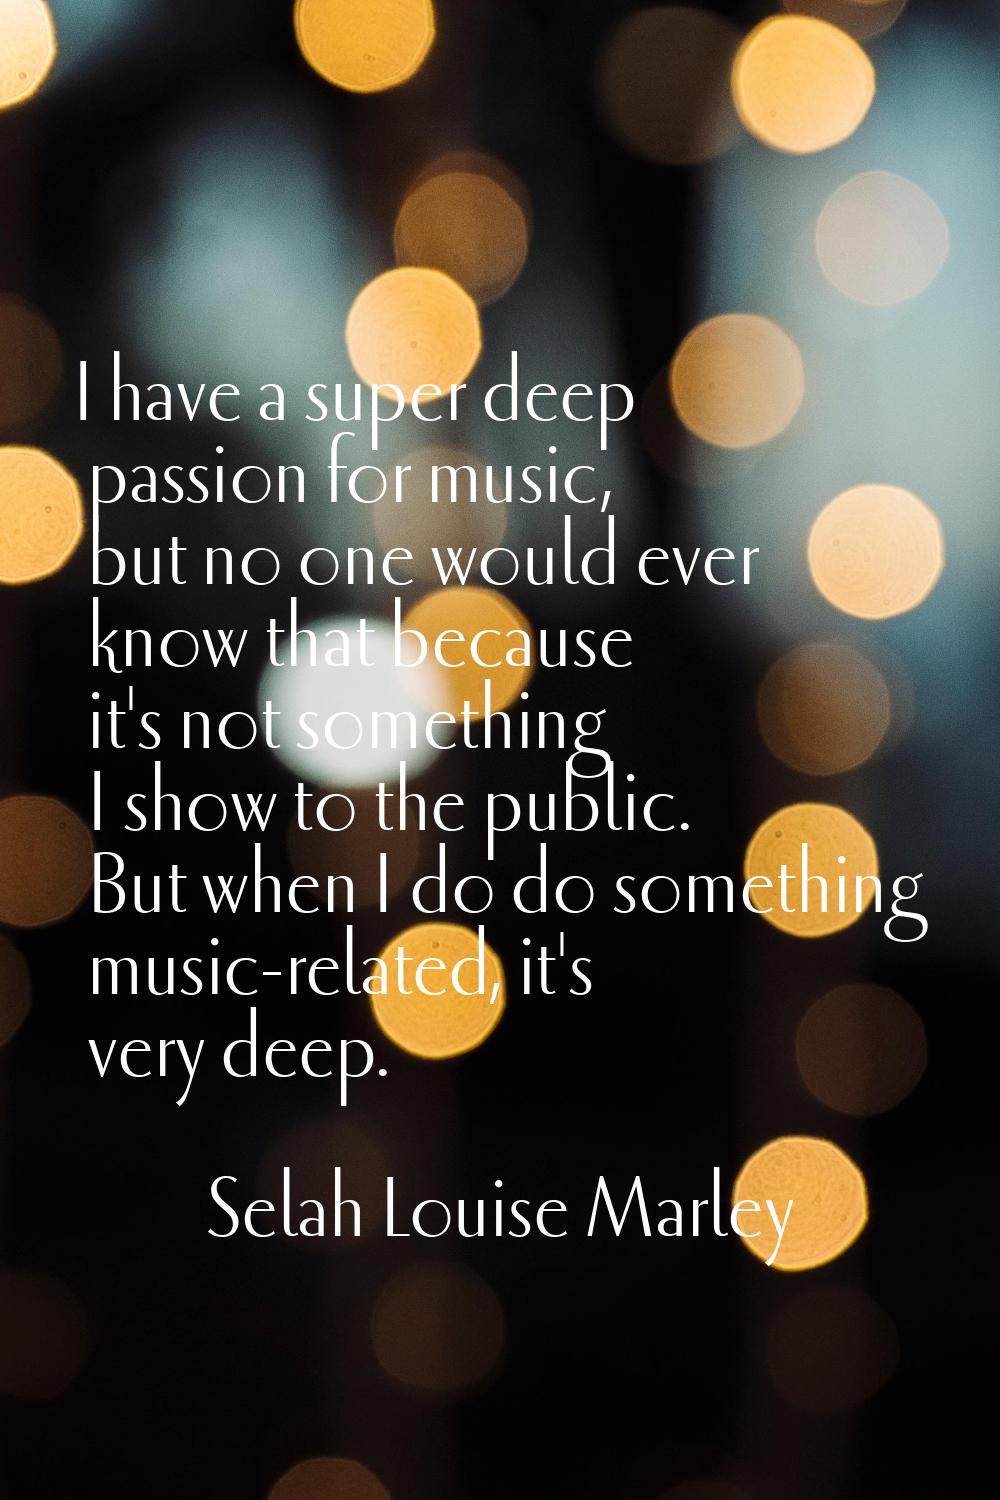 I have a super deep passion for music, but no one would ever know that because it's not something I